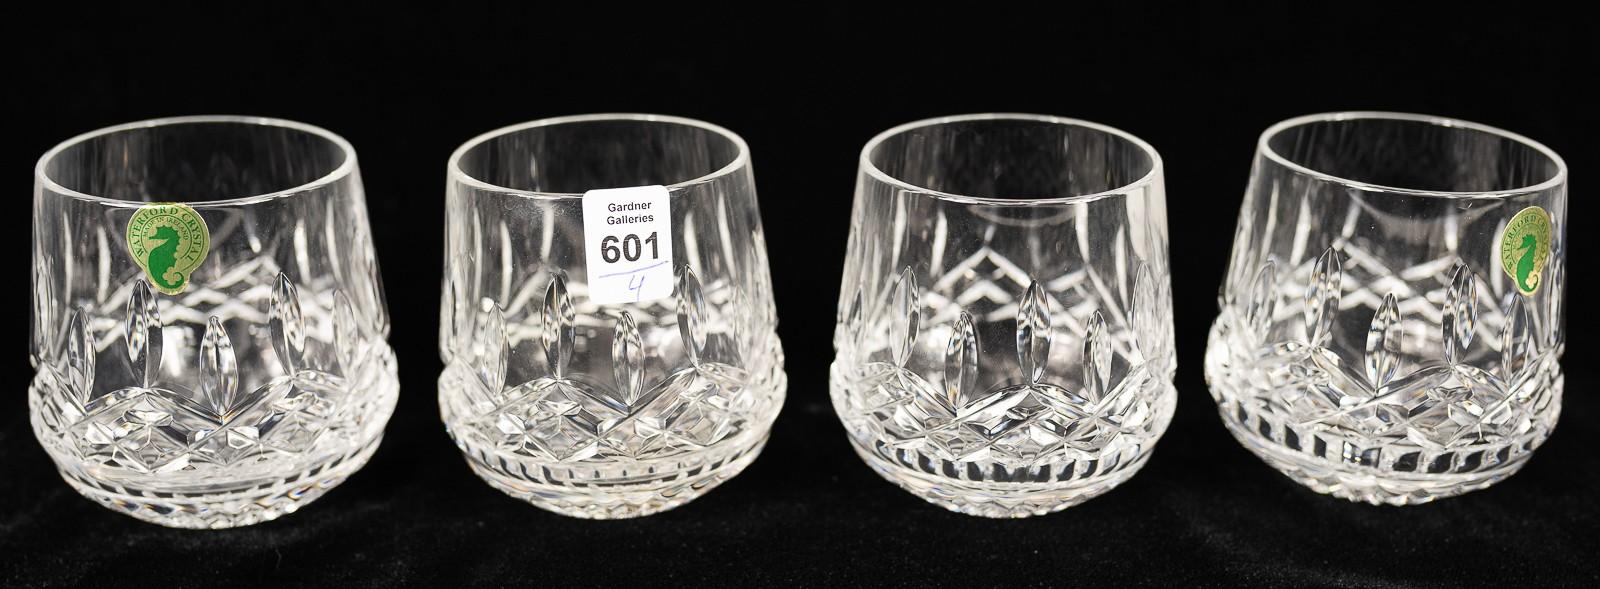 FOUR WATERFORD "LISMORE" CONNOISSEUR ROUNDED TUMBLERS